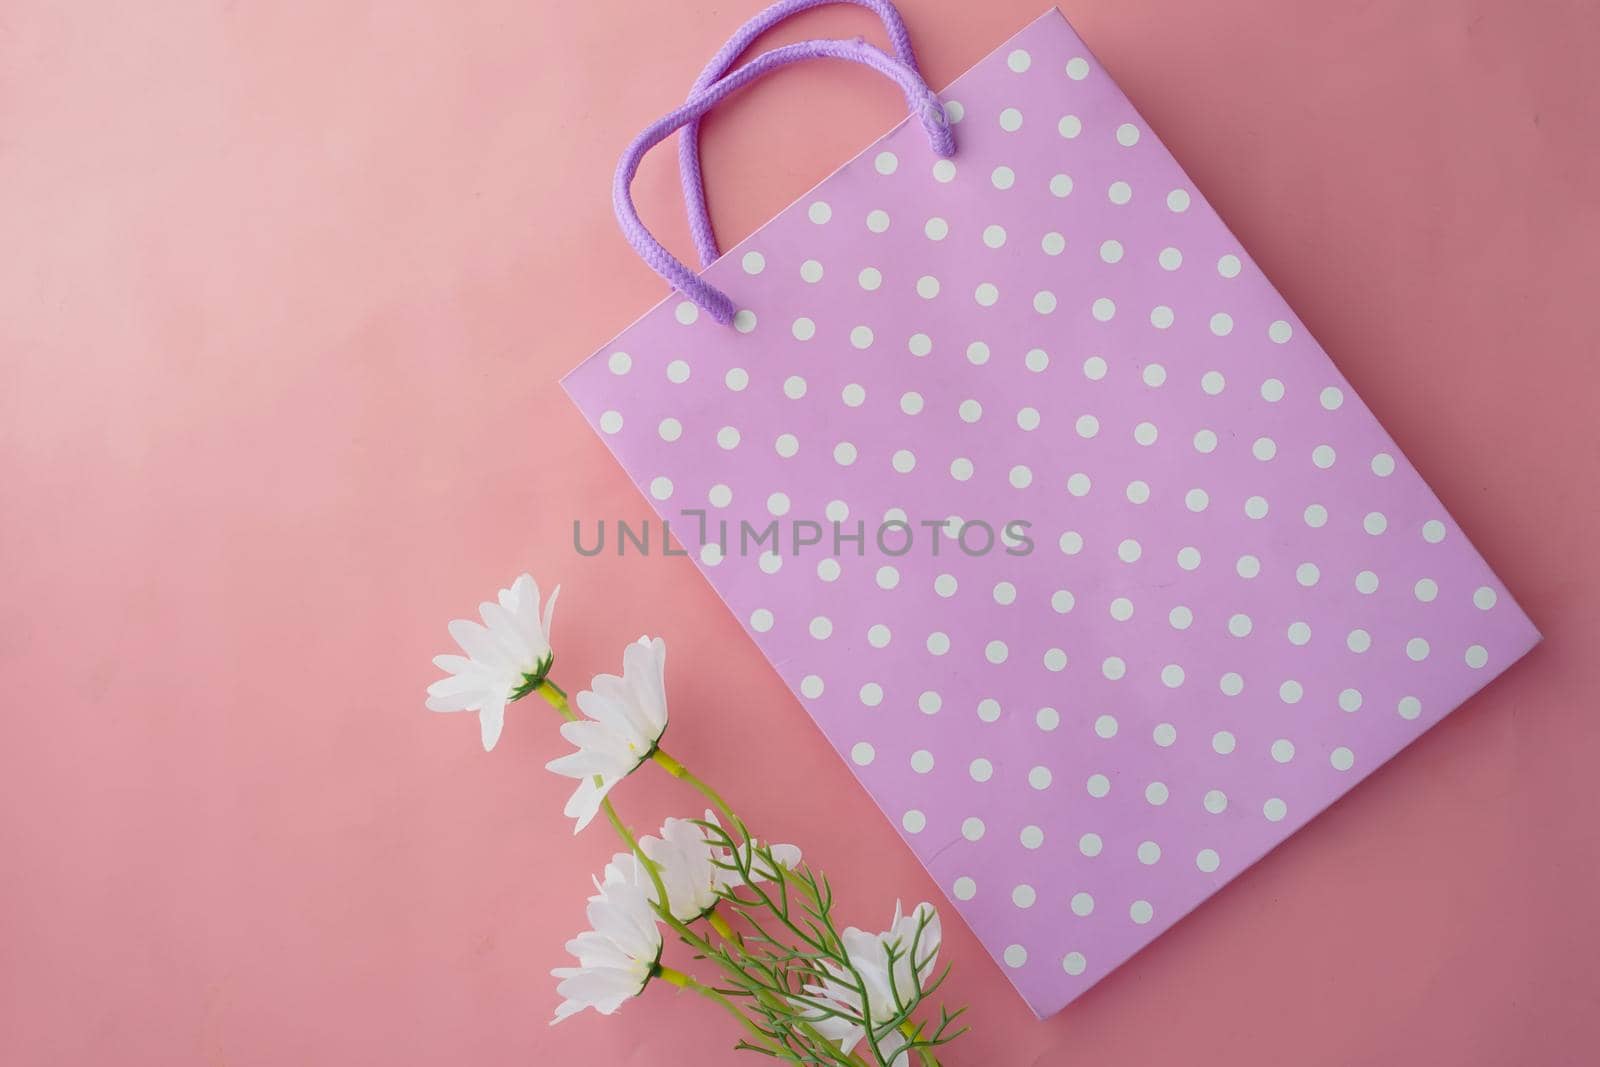 women gift bag on pink background top view